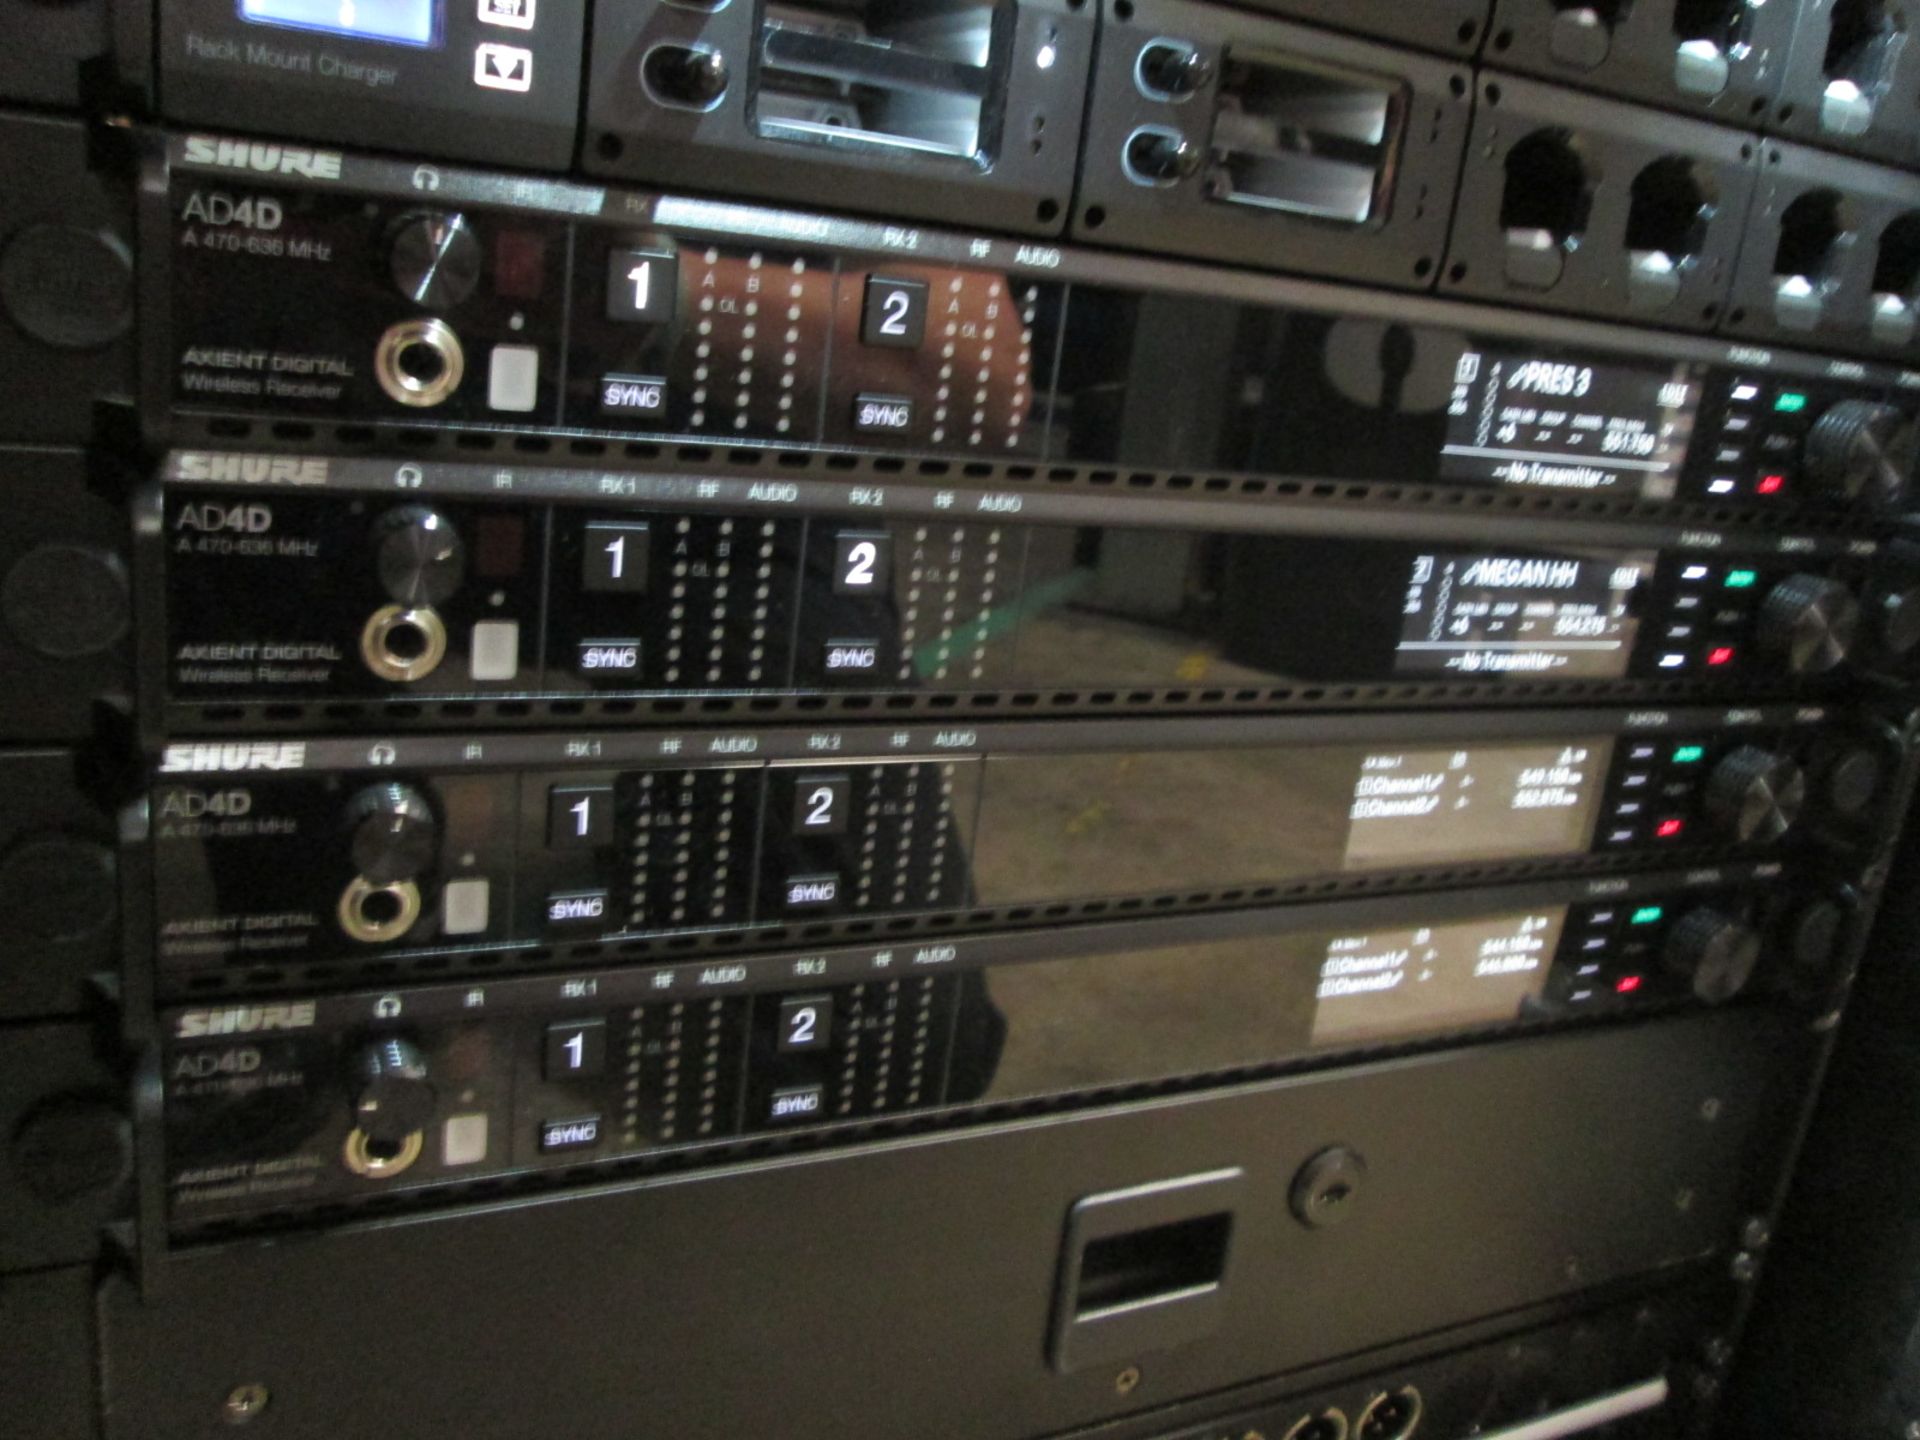 Shure Axiant Digital Radio Rack. To include 4 x AD4D 2 channel digital receivers (470.636 MHz), 4 - Image 4 of 13